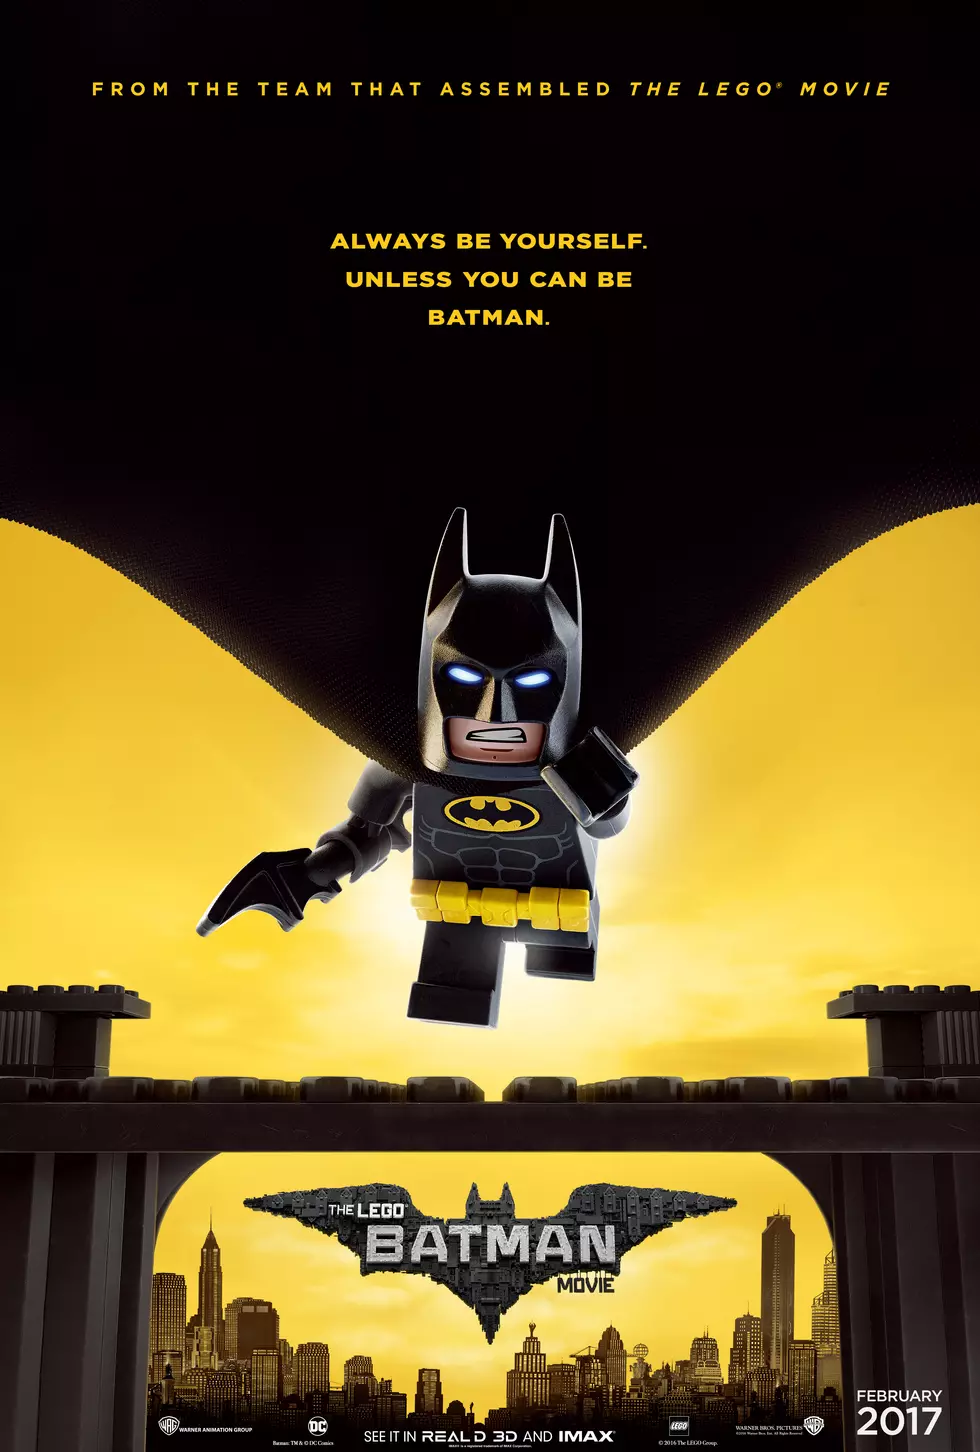 Celebrate Batman Day With a ‘The LEGO Batman Movie’ Poster